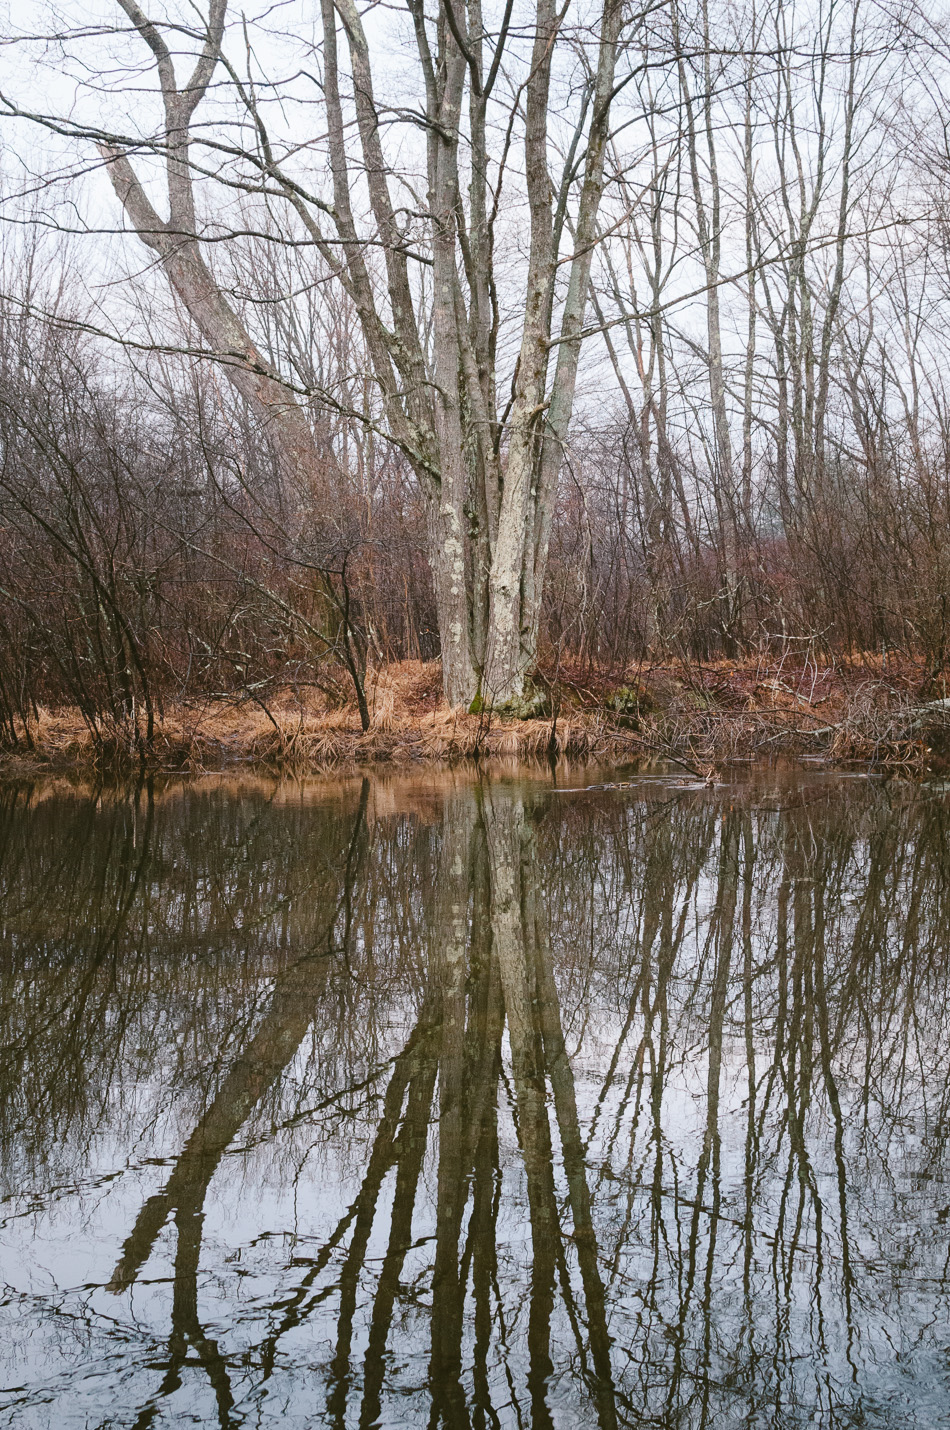 Solo tree reflecting on the Ashuelot River in Keene, NH